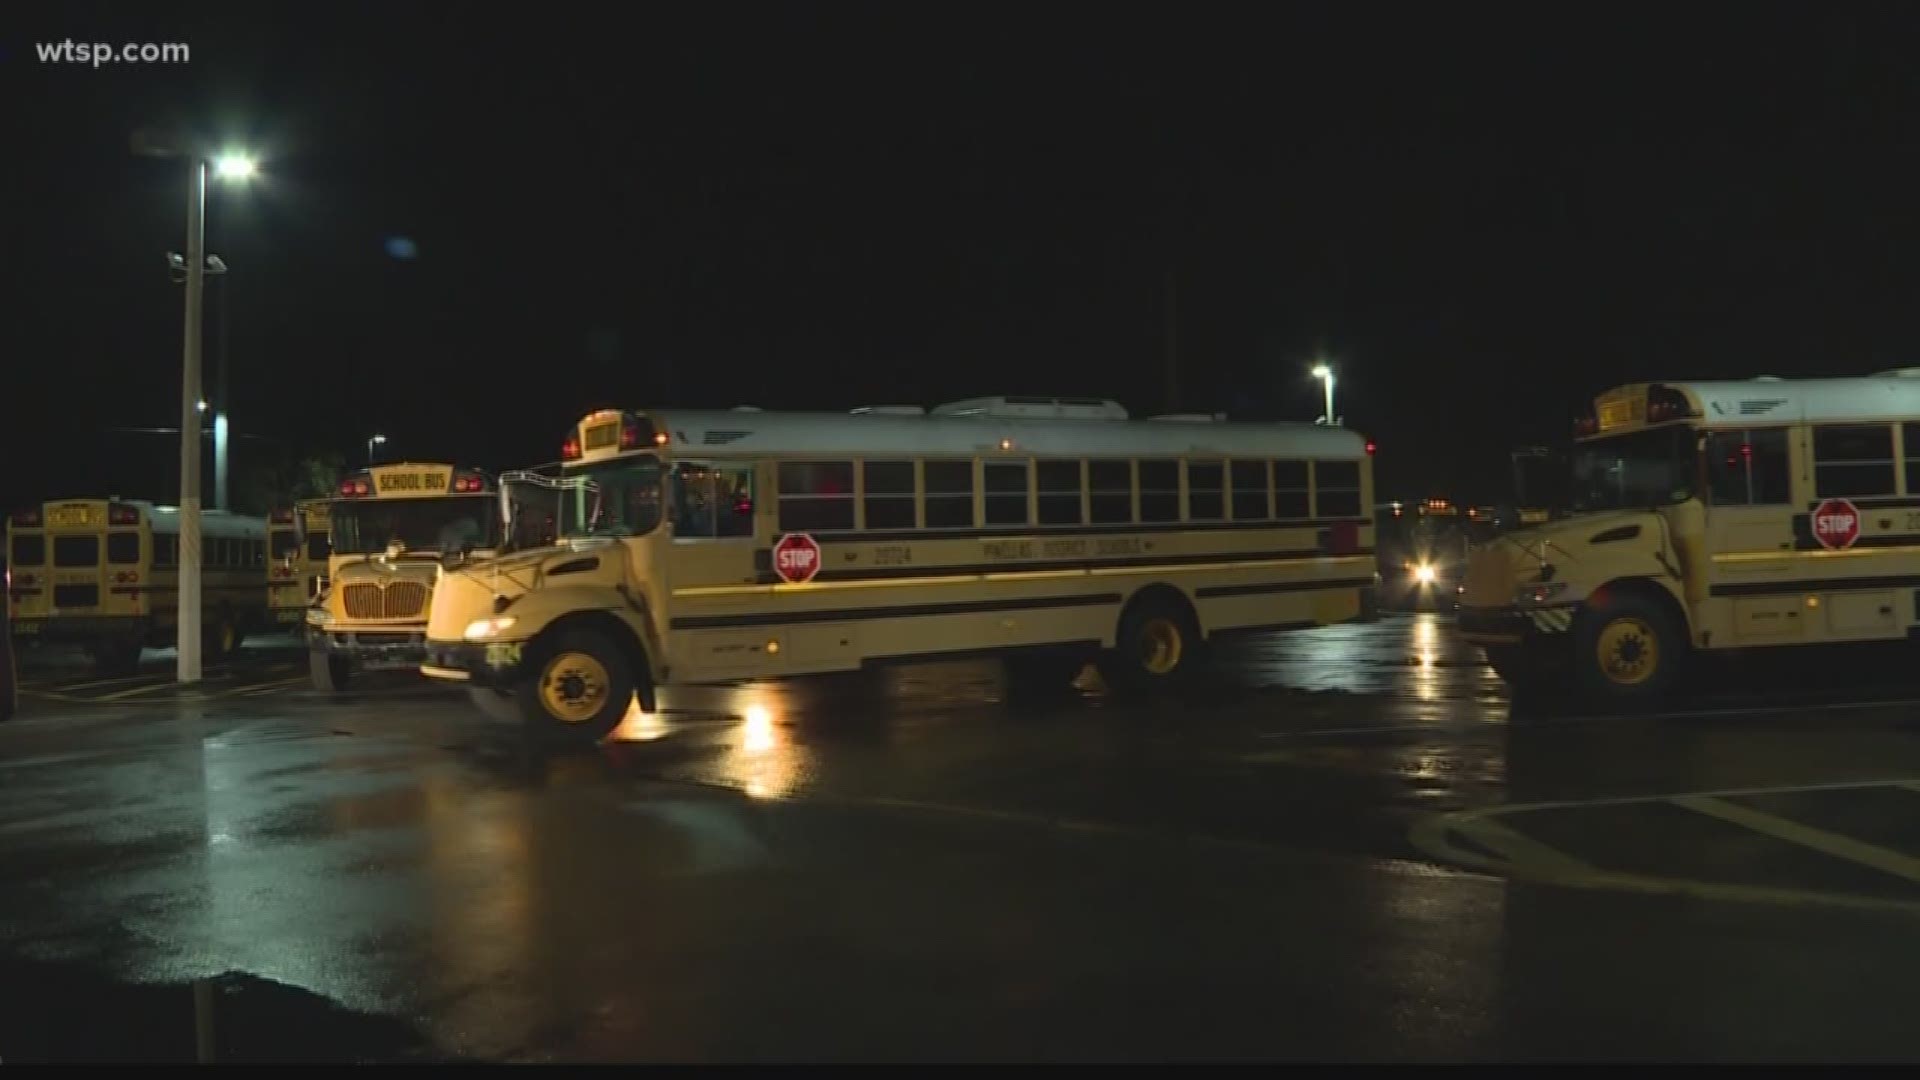 Thousands of Pinellas County students return to school Wednesday.

Pinellas County Schools was the only public school district throughout Tampa Bay that didn’t start classes on Monday. https://on.wtsp.com/2P4HLwm